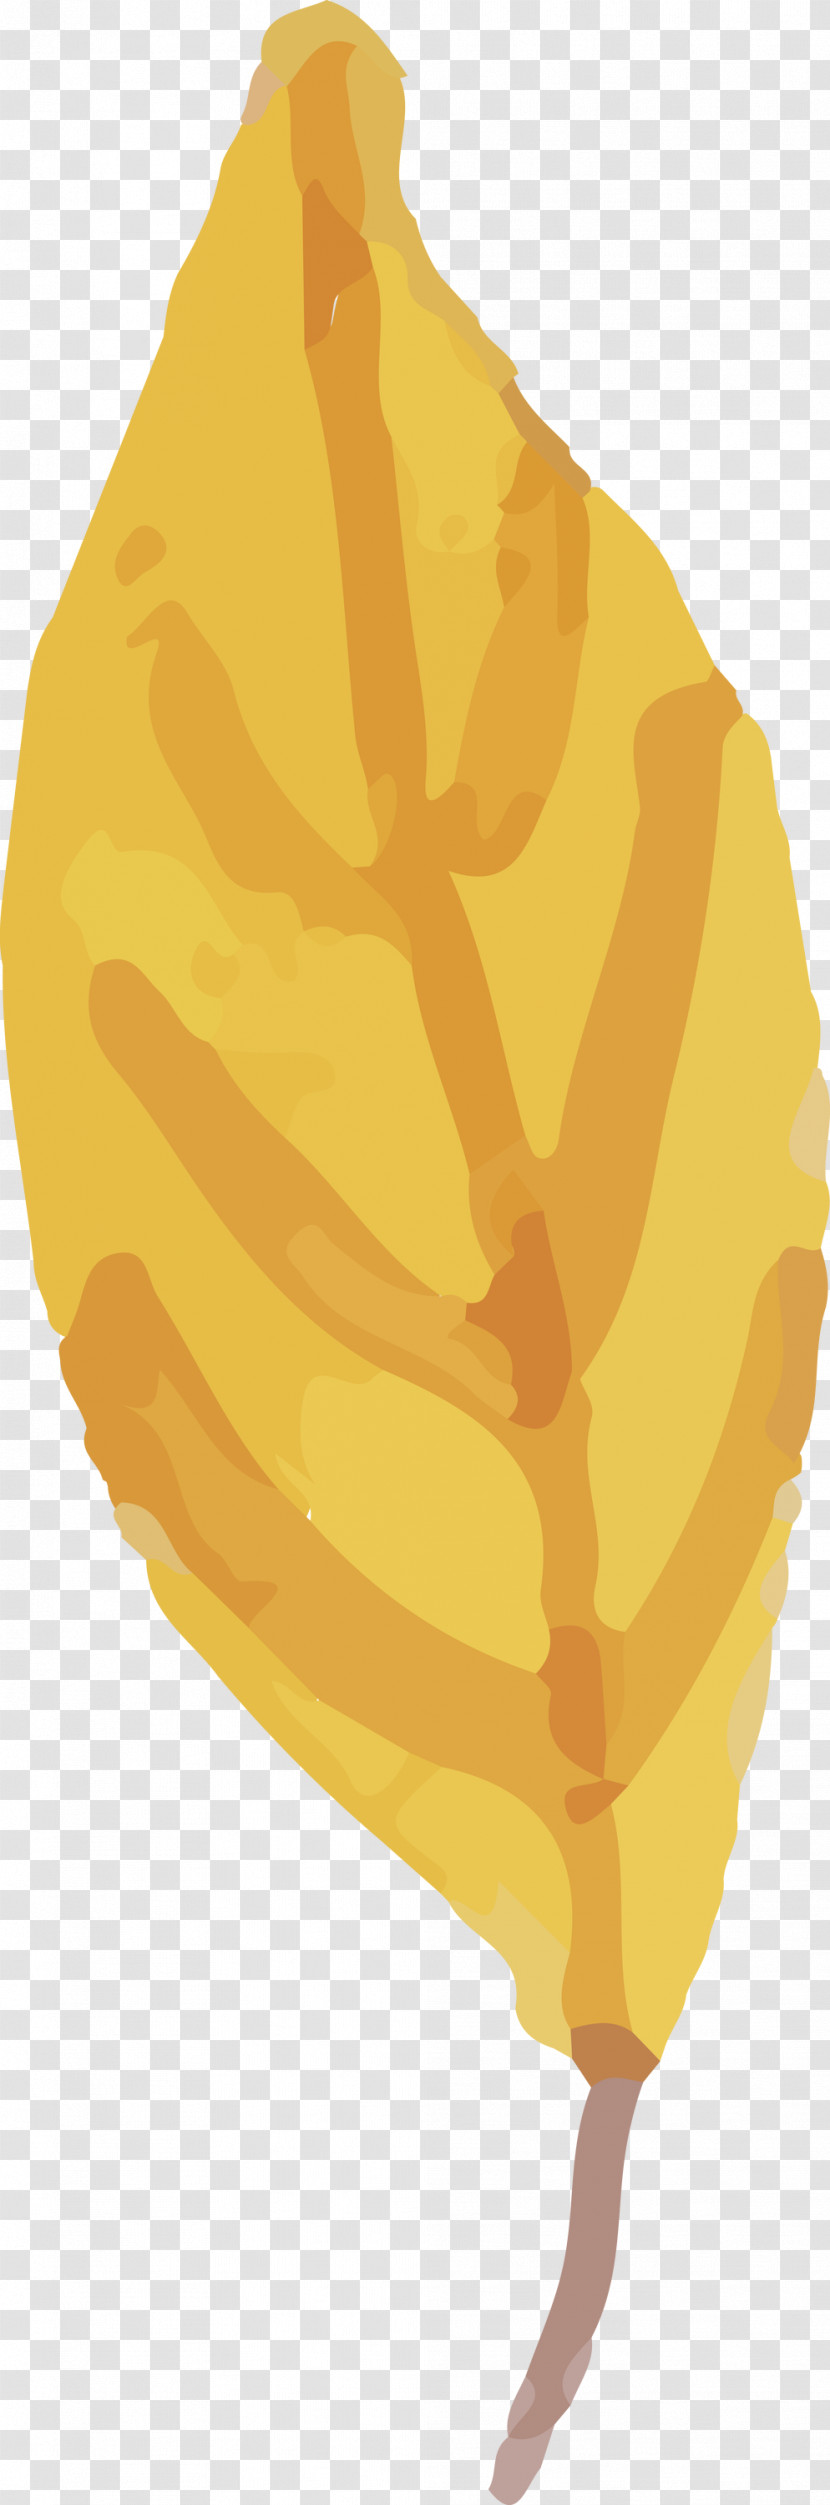 Leaf Yellow Commodity Fruit Biology Transparent PNG